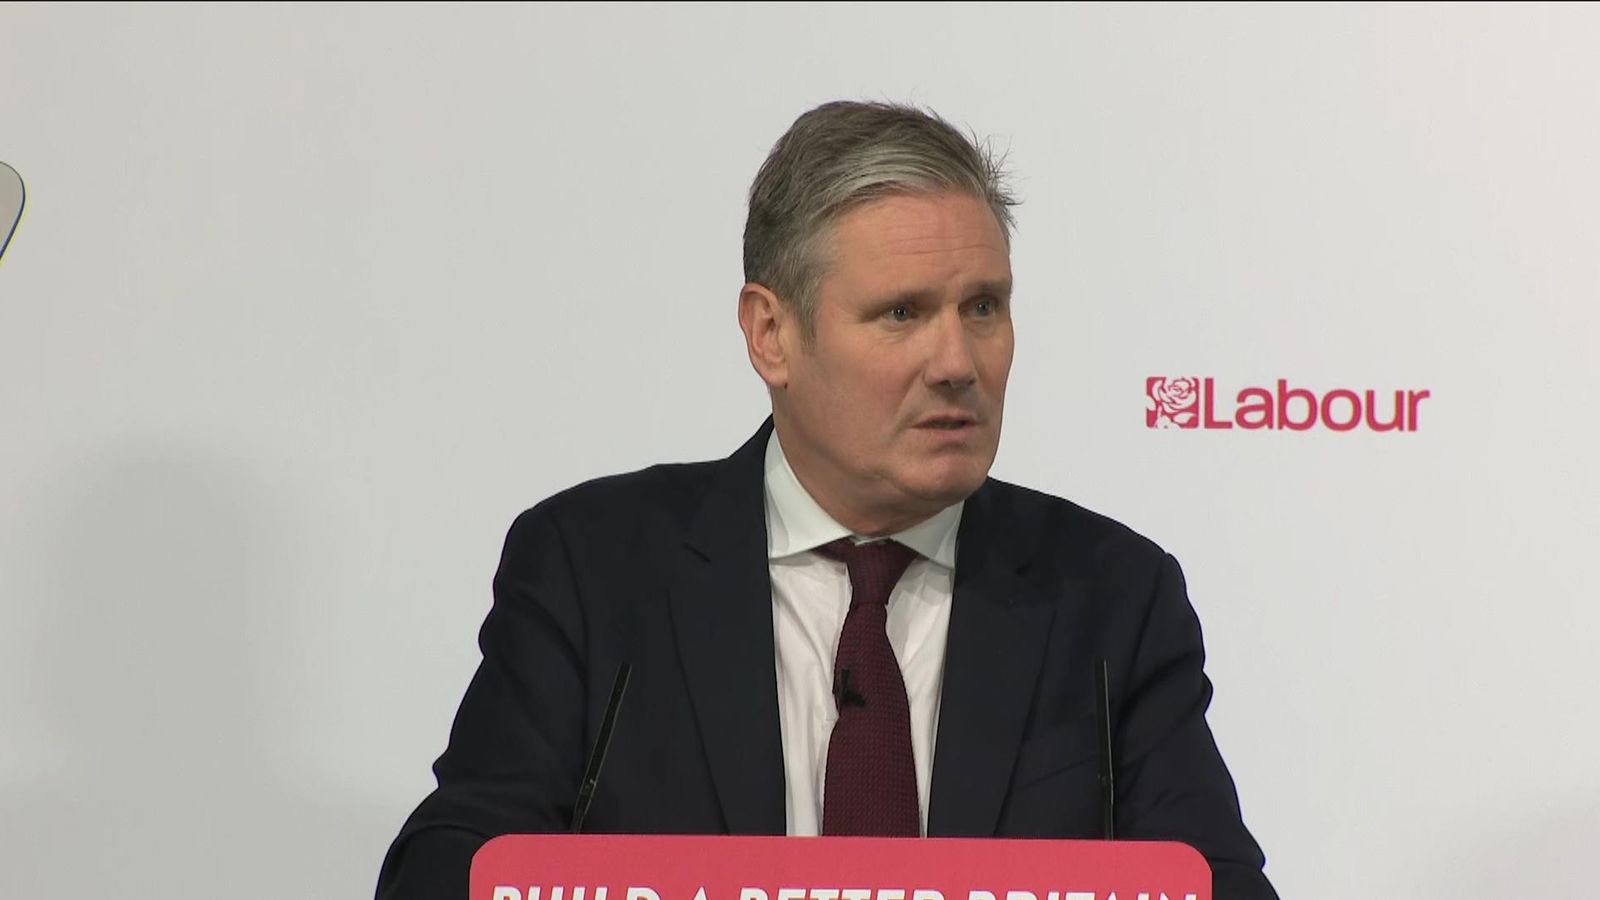 Sir Keir Starmer warns 'policy matters' after ULEZ blamed for by-election loss in Uxbridge